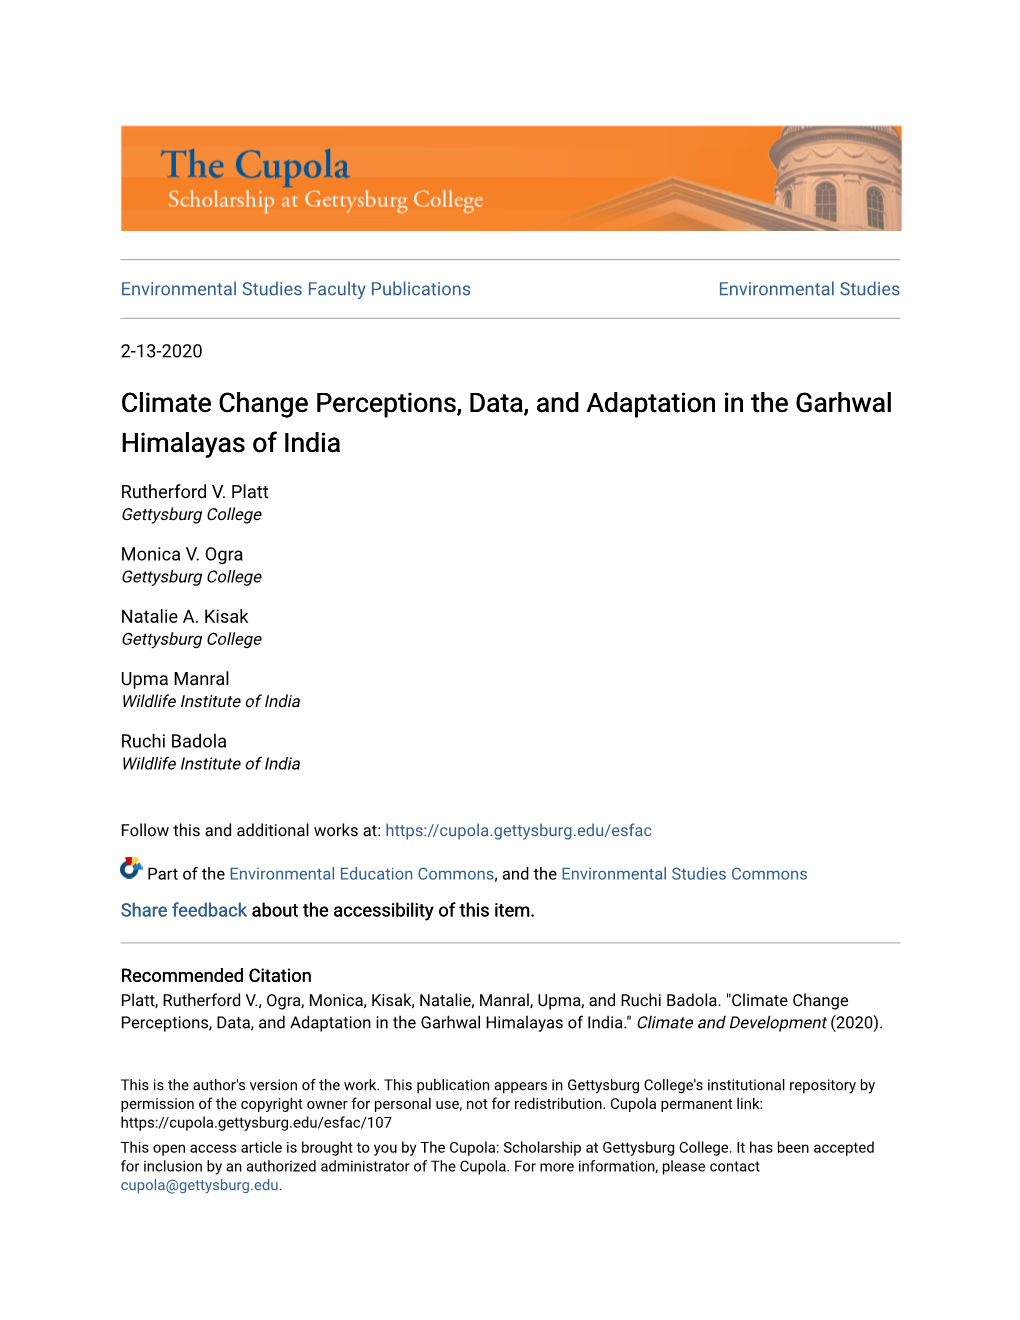 Climate Change Perceptions, Data, and Adaptation in the Garhwal Himalayas of India